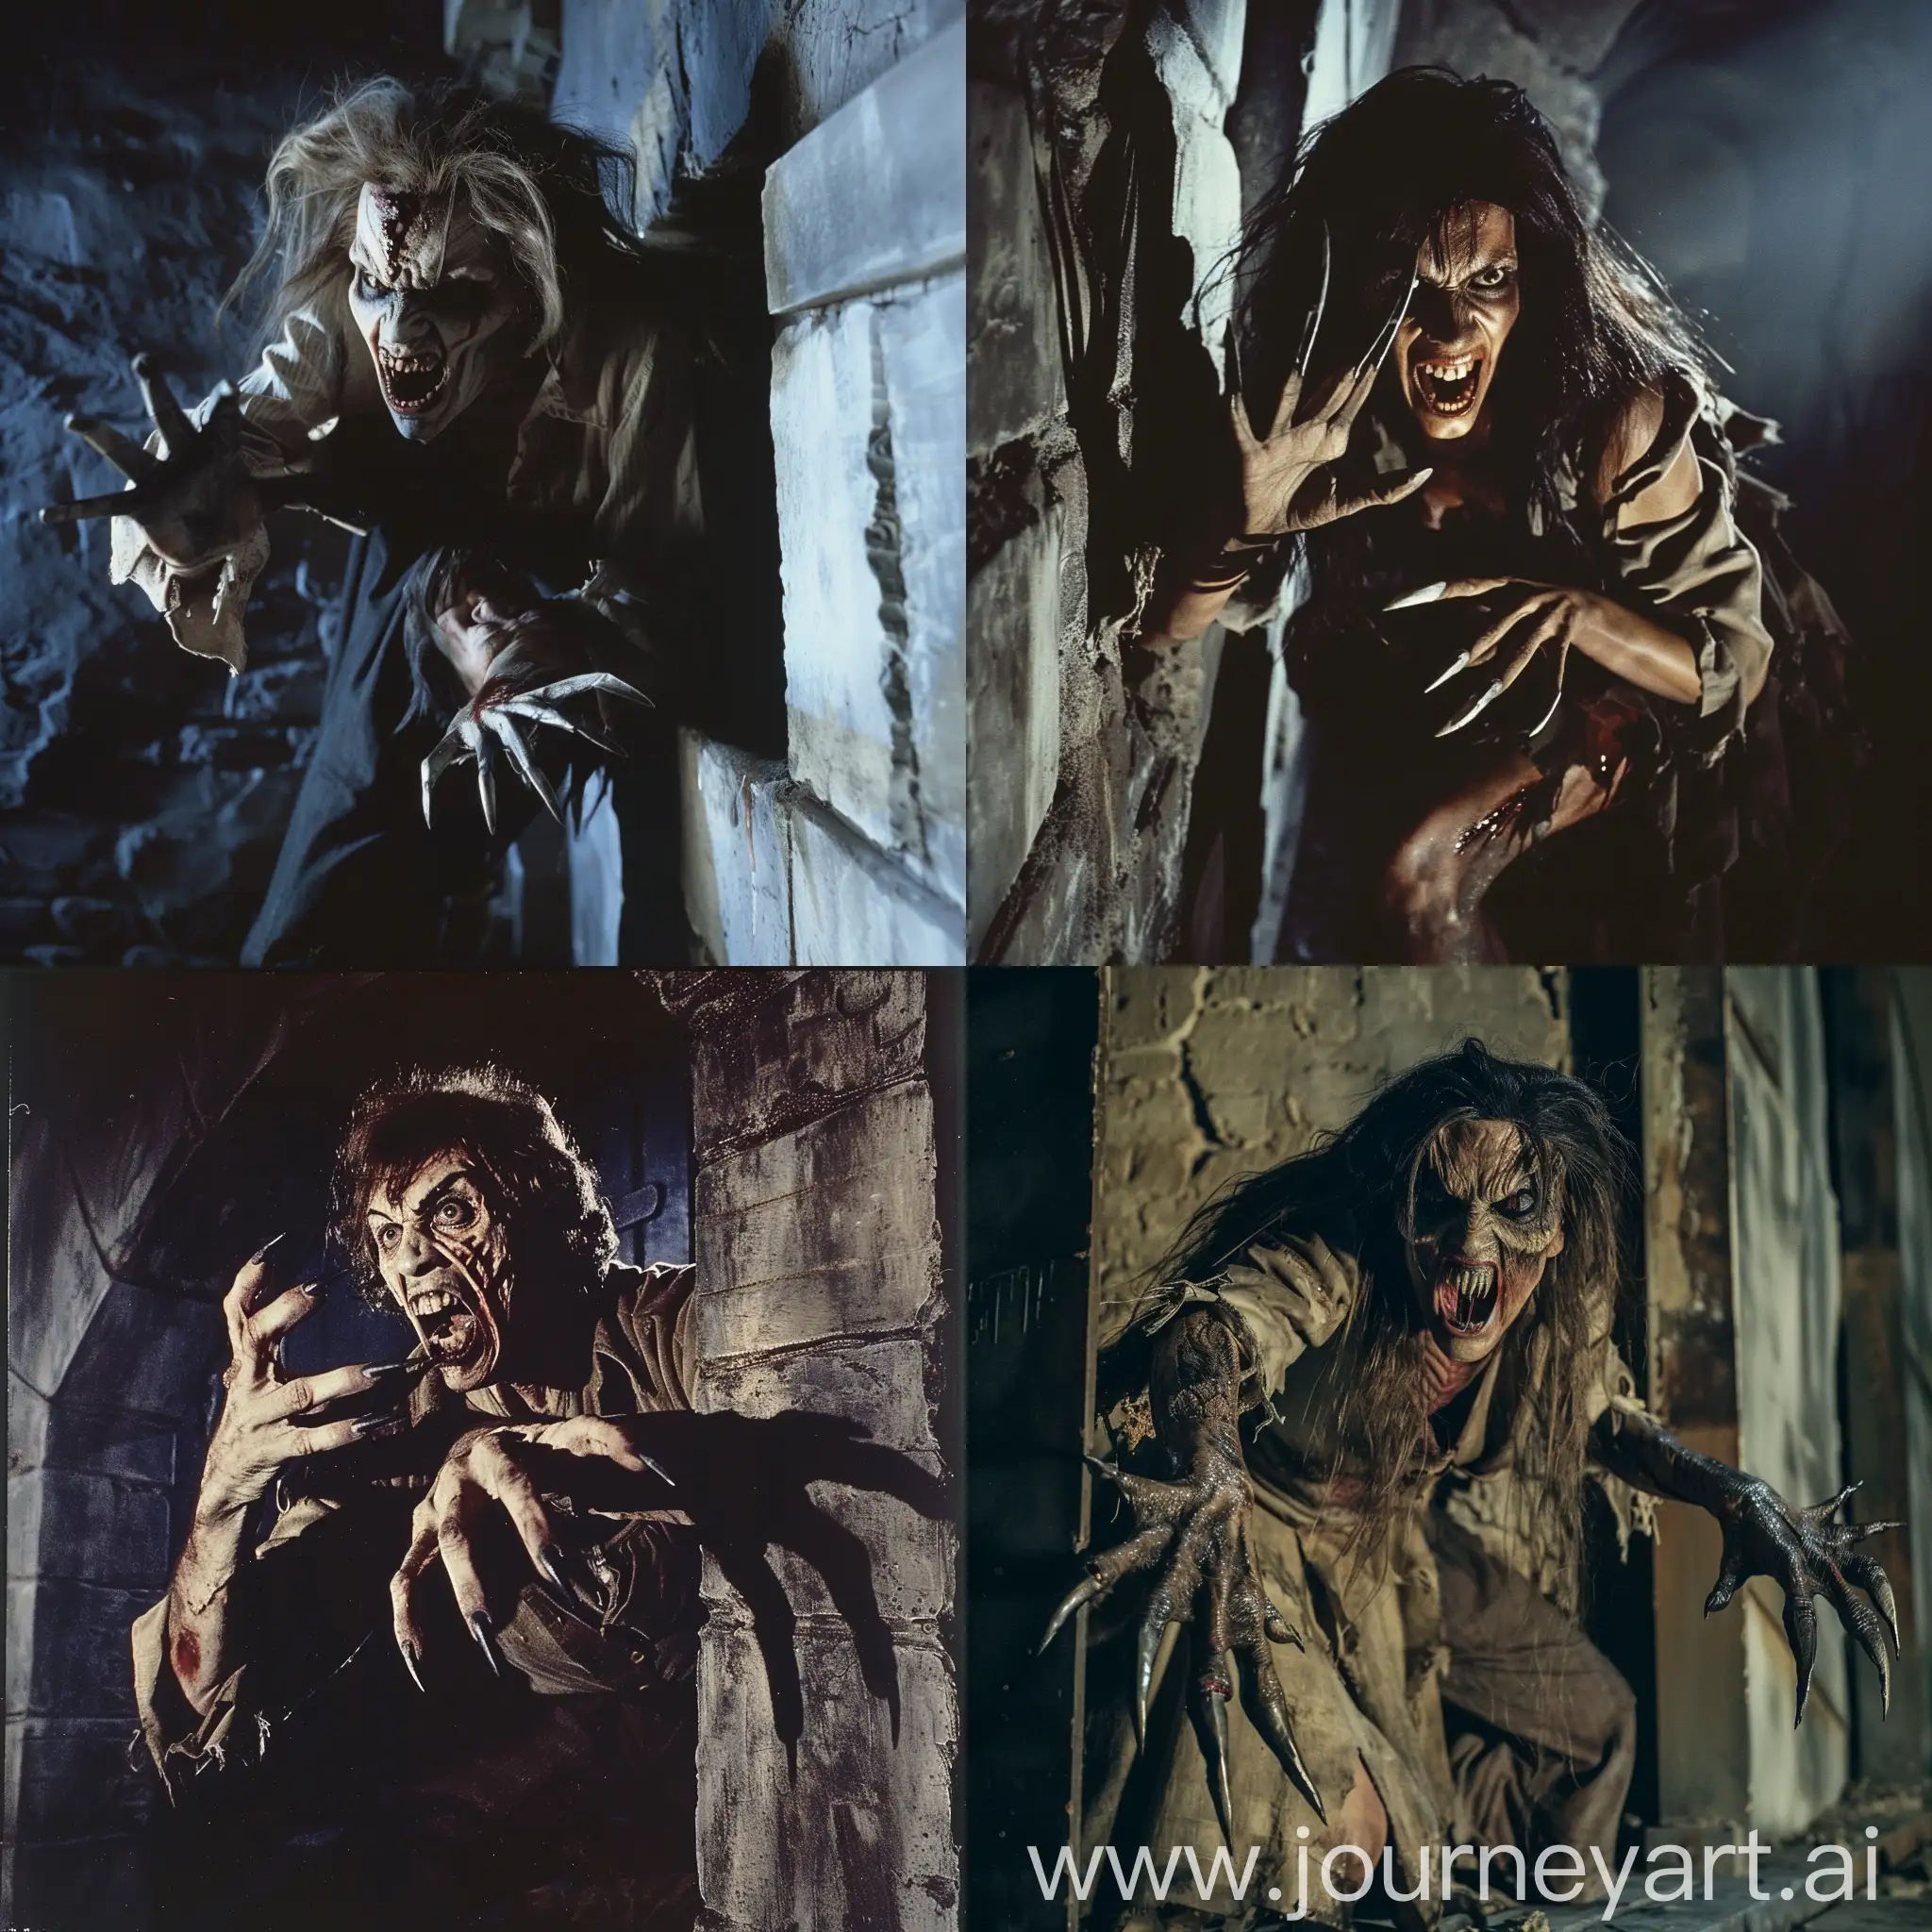 1. Describe the physical appearance of the vampire: "a vampire with long, pointed nails like claws on each of her five-fingered hands, an aggressively open mouth revealing terrifying fangs, a wild look, dressed in torn clothes, and resembling a dead man who has emerged from his grave." 2. Describe the vampire's behavior and the scene: "The vampire has pinned her victim in a corner and is preparing to strike, with the scene taking place at night in an abandoned building."